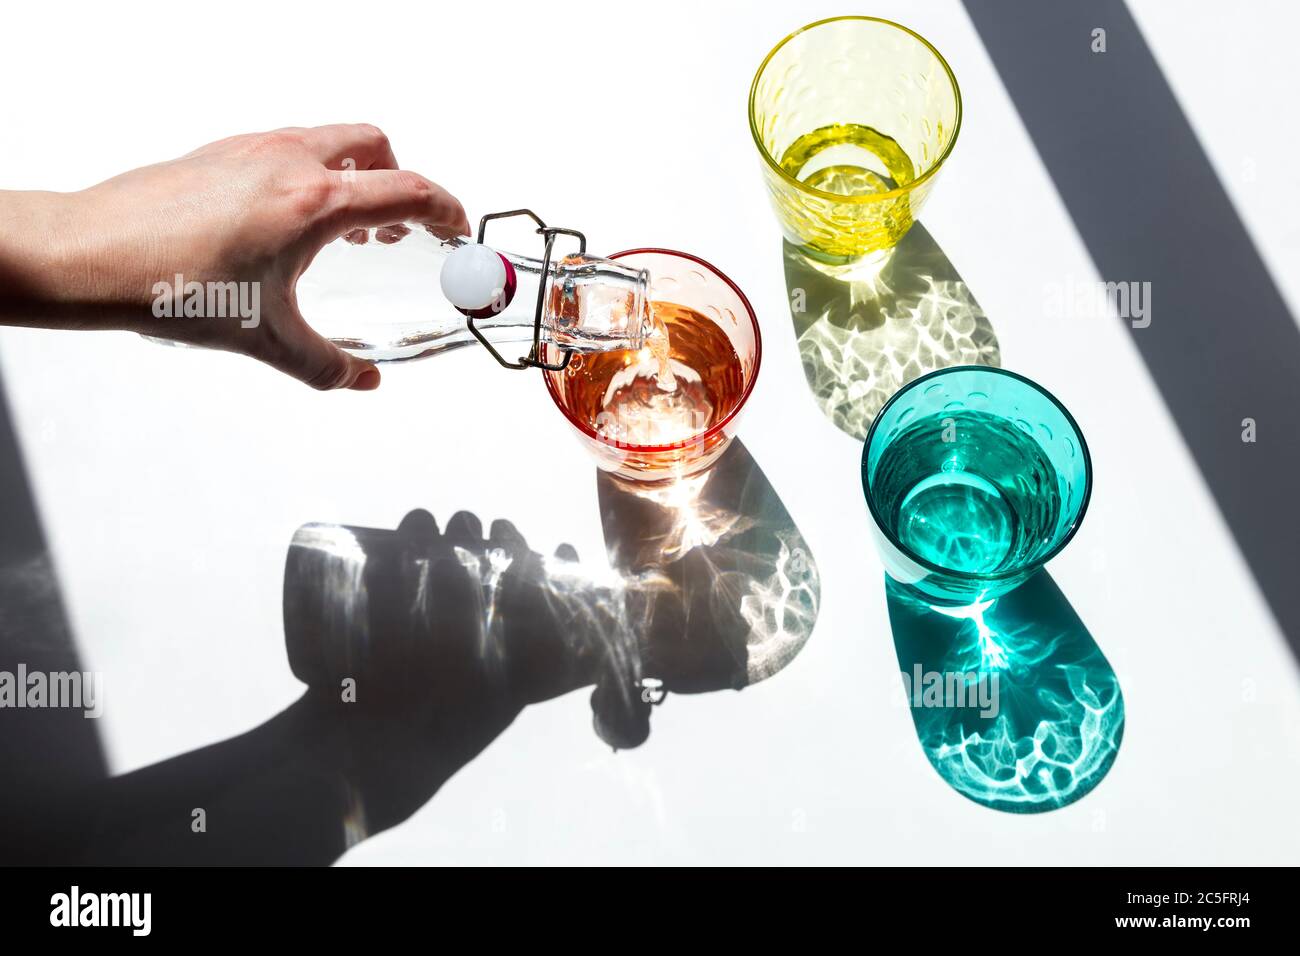 A person pours water into colored glass cups under the strong sunlight that enters through the window and casts its textured, colored shadows on a whi Stock Photo